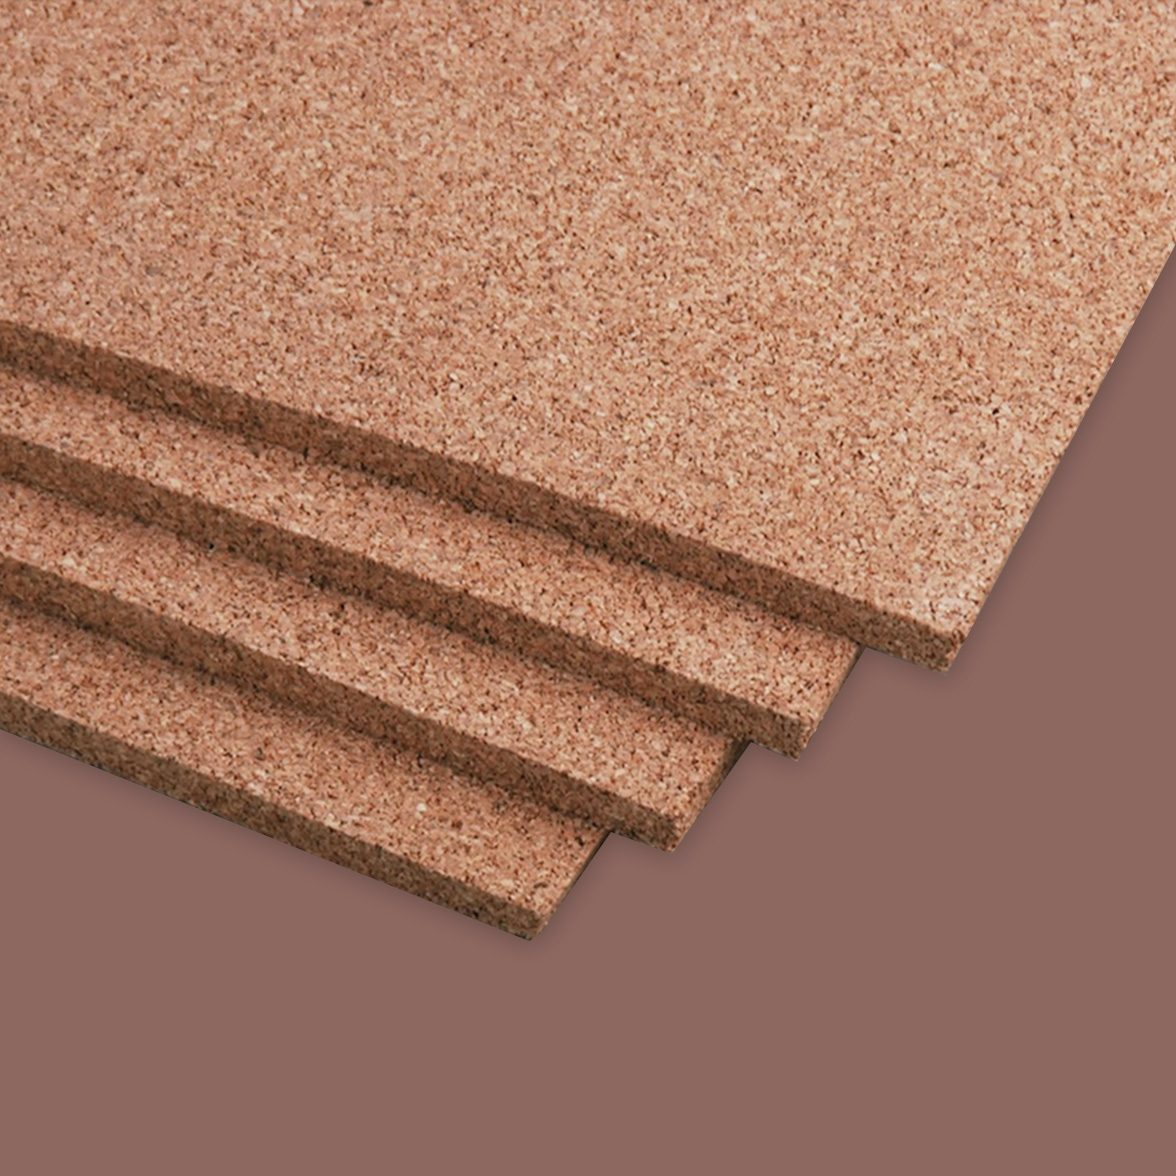 2 CORK SHEETS 14"x 23" x 1/2" THICK BULLETIN MESSAGE BOARD WALL TILES ACOUSTIC 